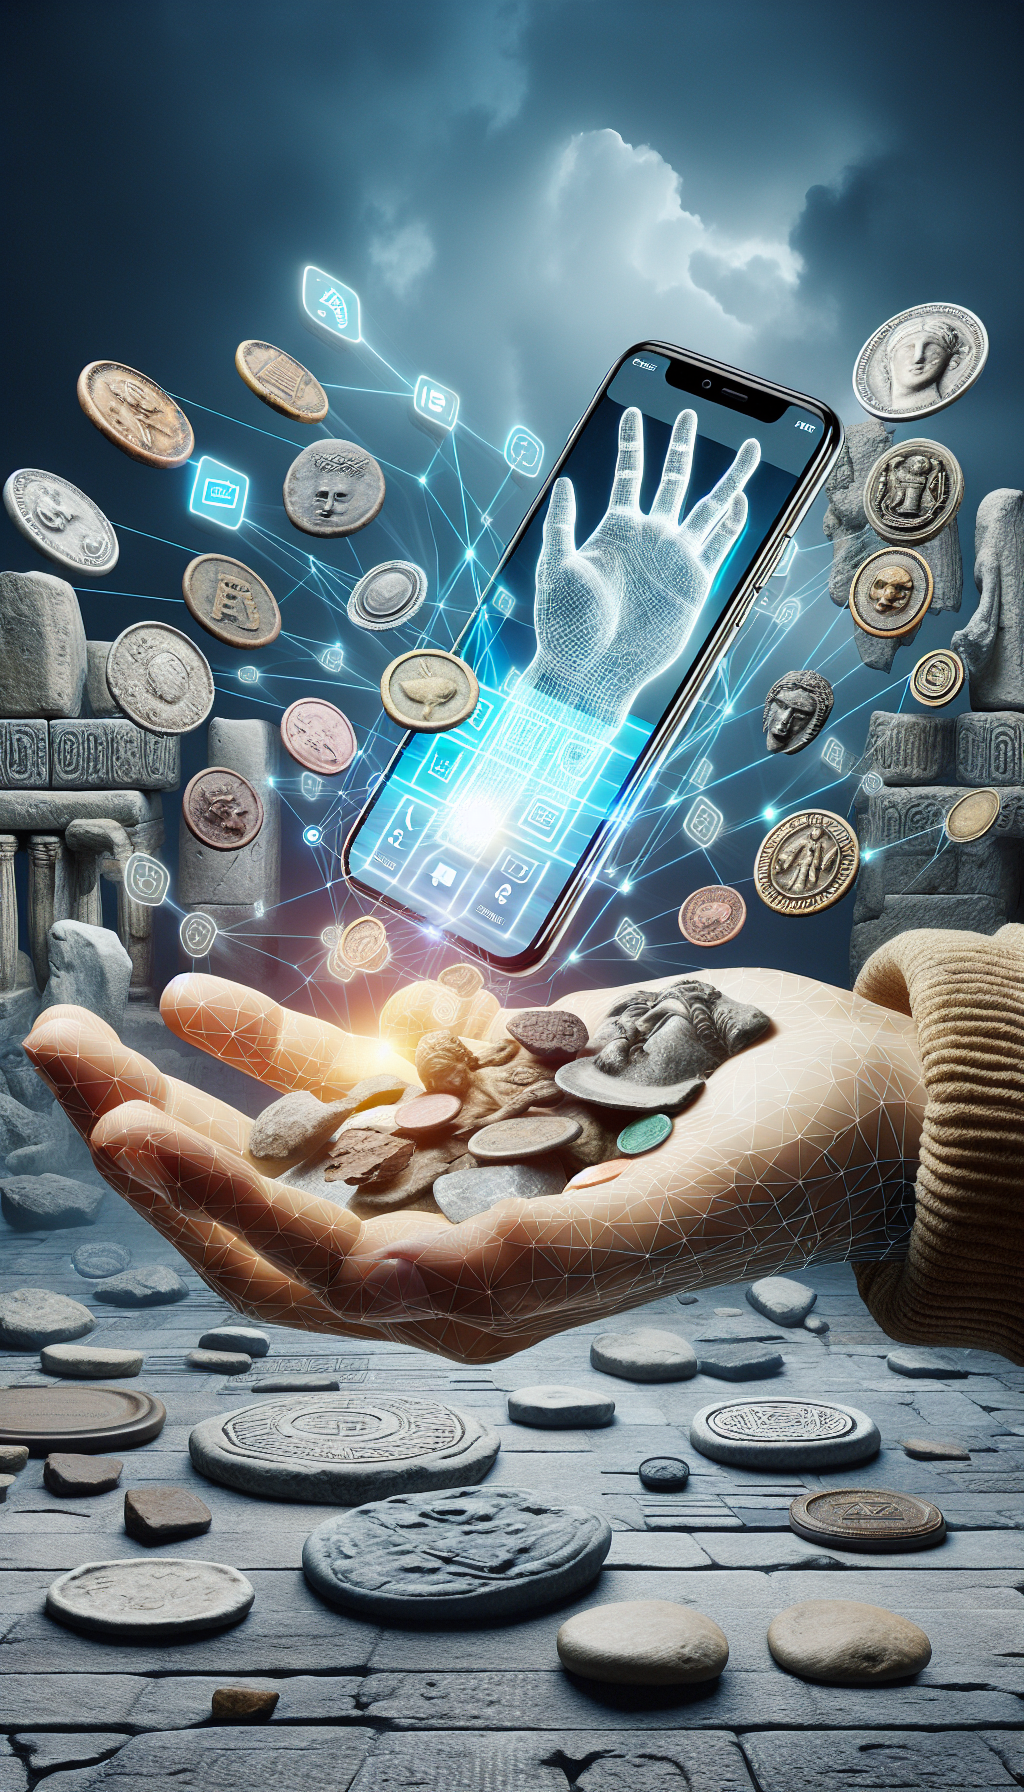 A smartphone screen displaying an app interface hovers above an outstretched hand sprinkled with ancient coins and artifacts, with digital lines connecting each piece to pop-up information blurbs. The hand intersects dimensions - half modern, half ancient - with background contrasts of sleek tech and stone tablets, symbolizing the link between present and past through technology's treasure-identifying magic.